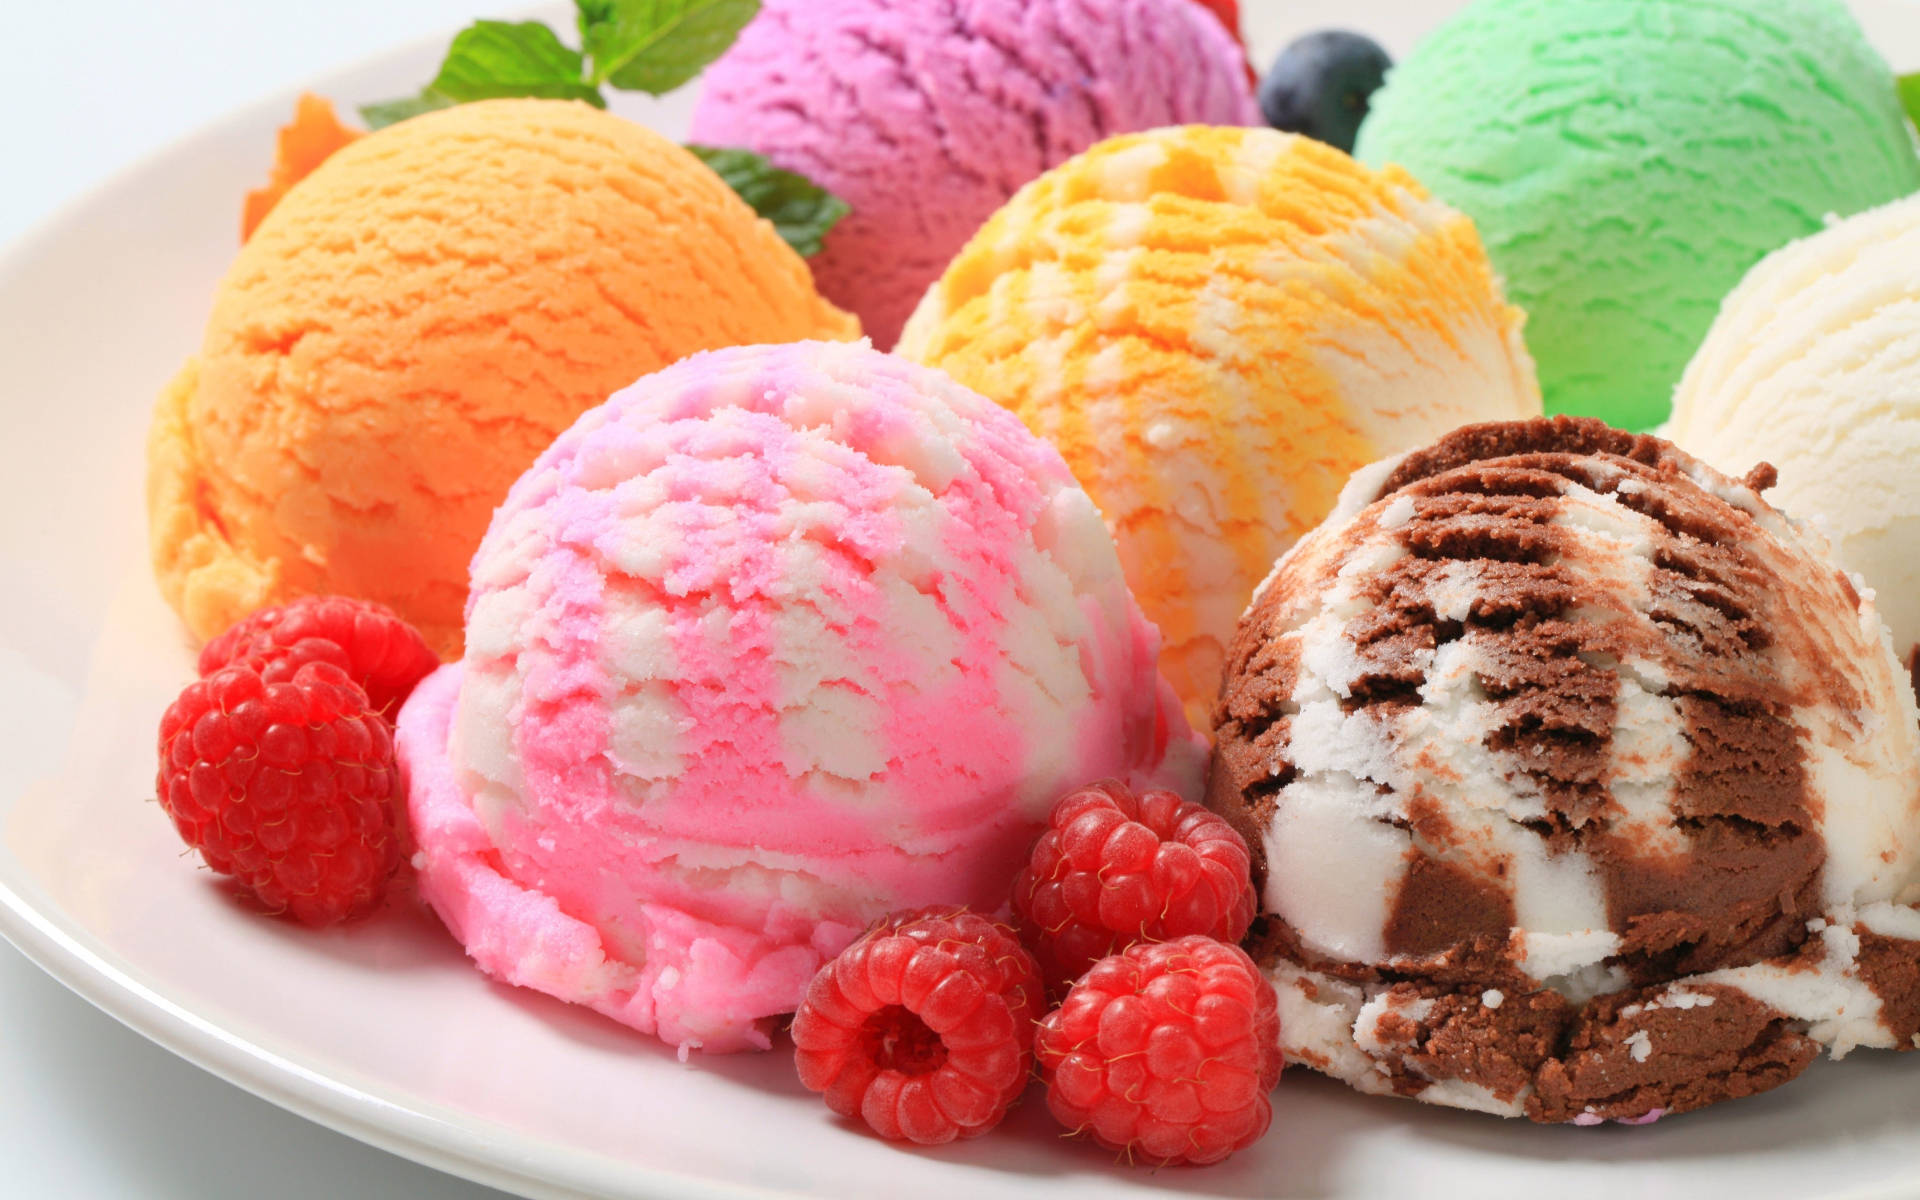 Assorted Ice Creams And Berries